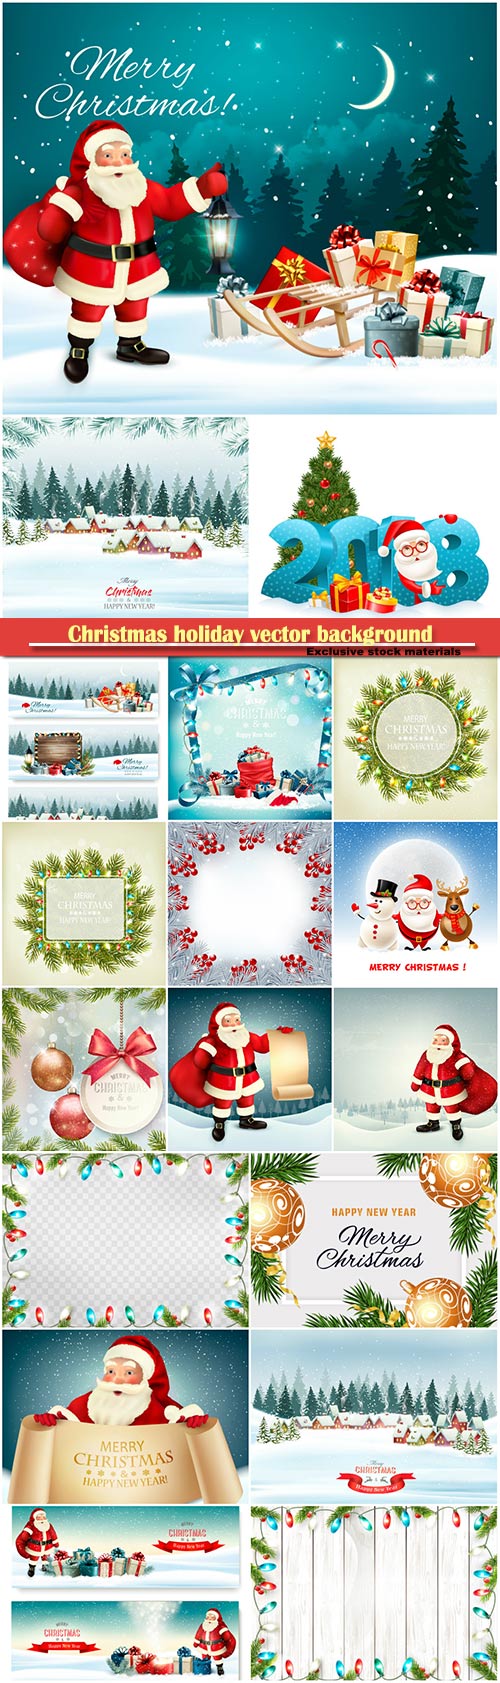 Christmas holiday vector background with Santa Claus and branches of tree and a colorful balls